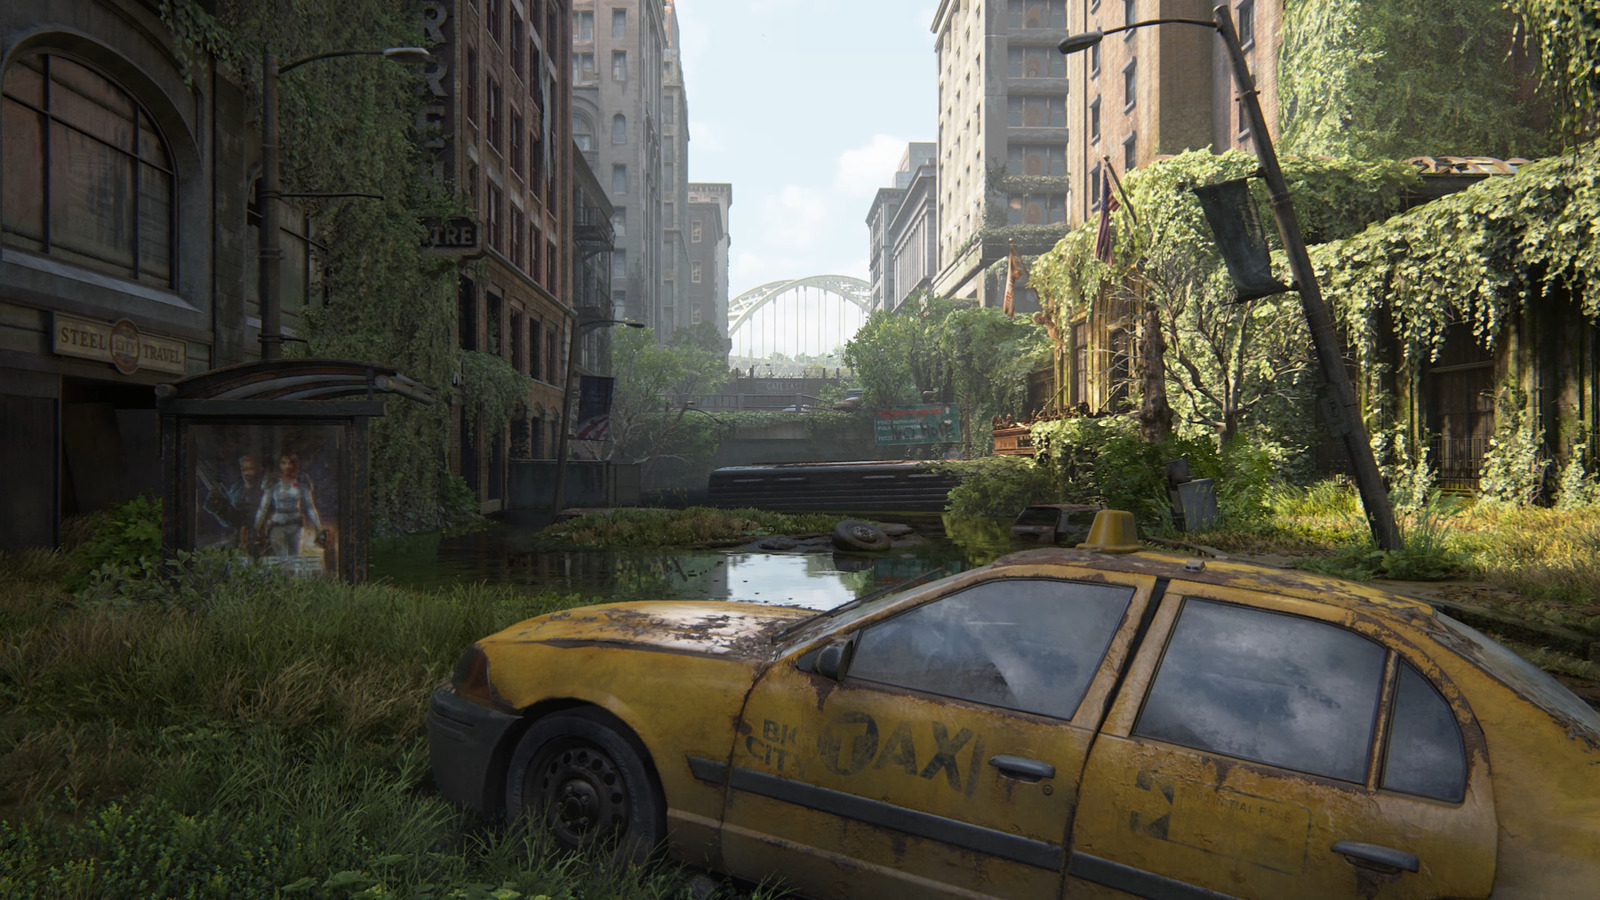 A new trailer shows off The Last of Us Part II PS5 remastered